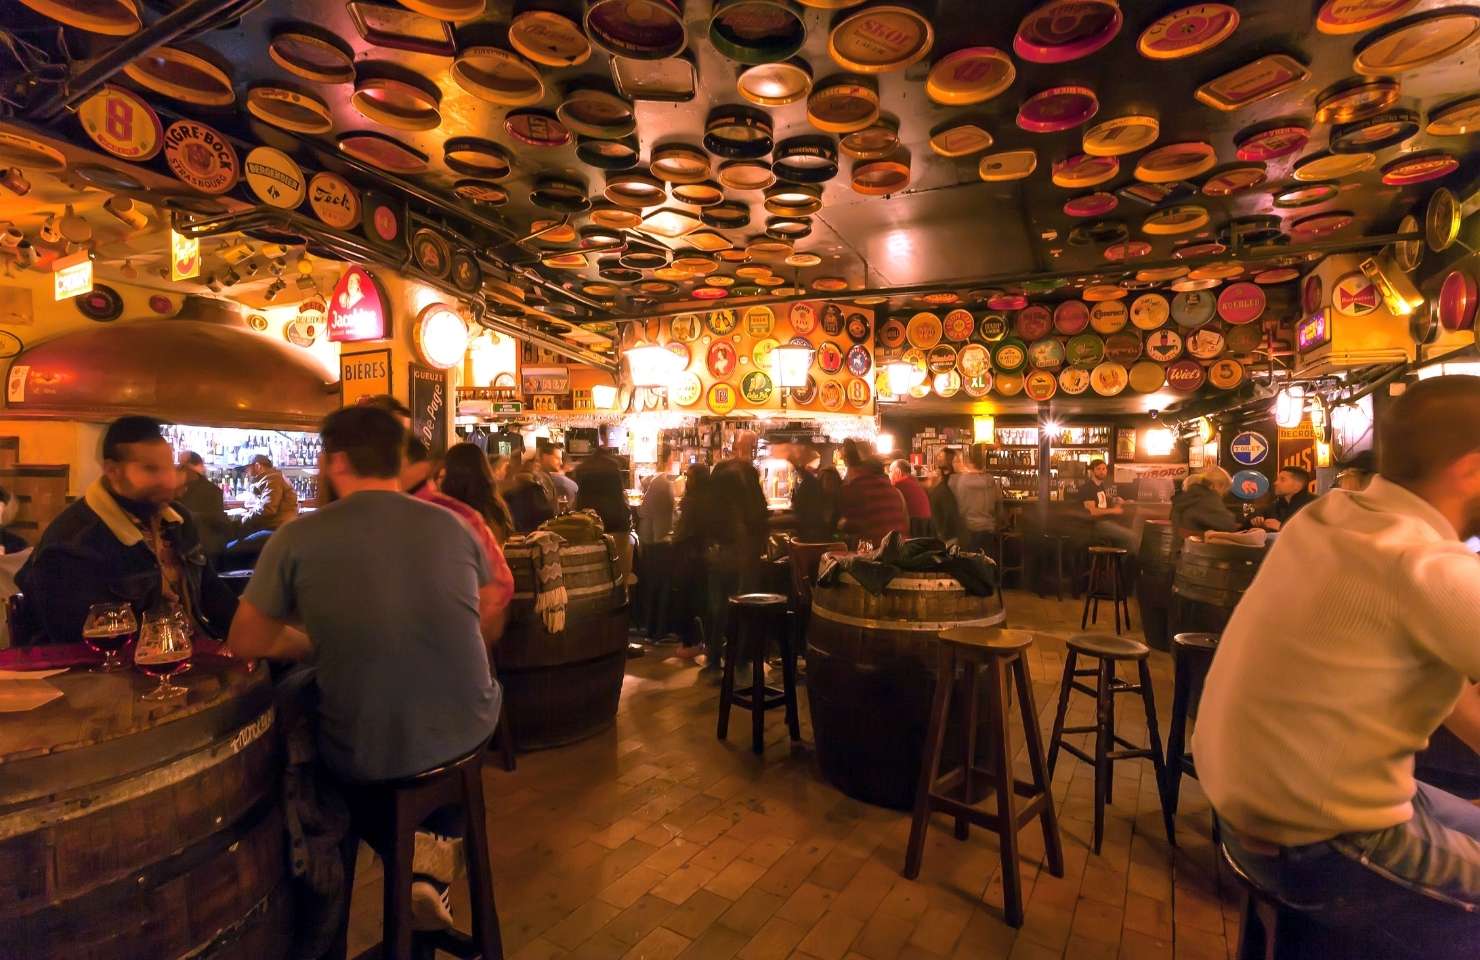 one of the best secret bars in Lisbon filled with people at night